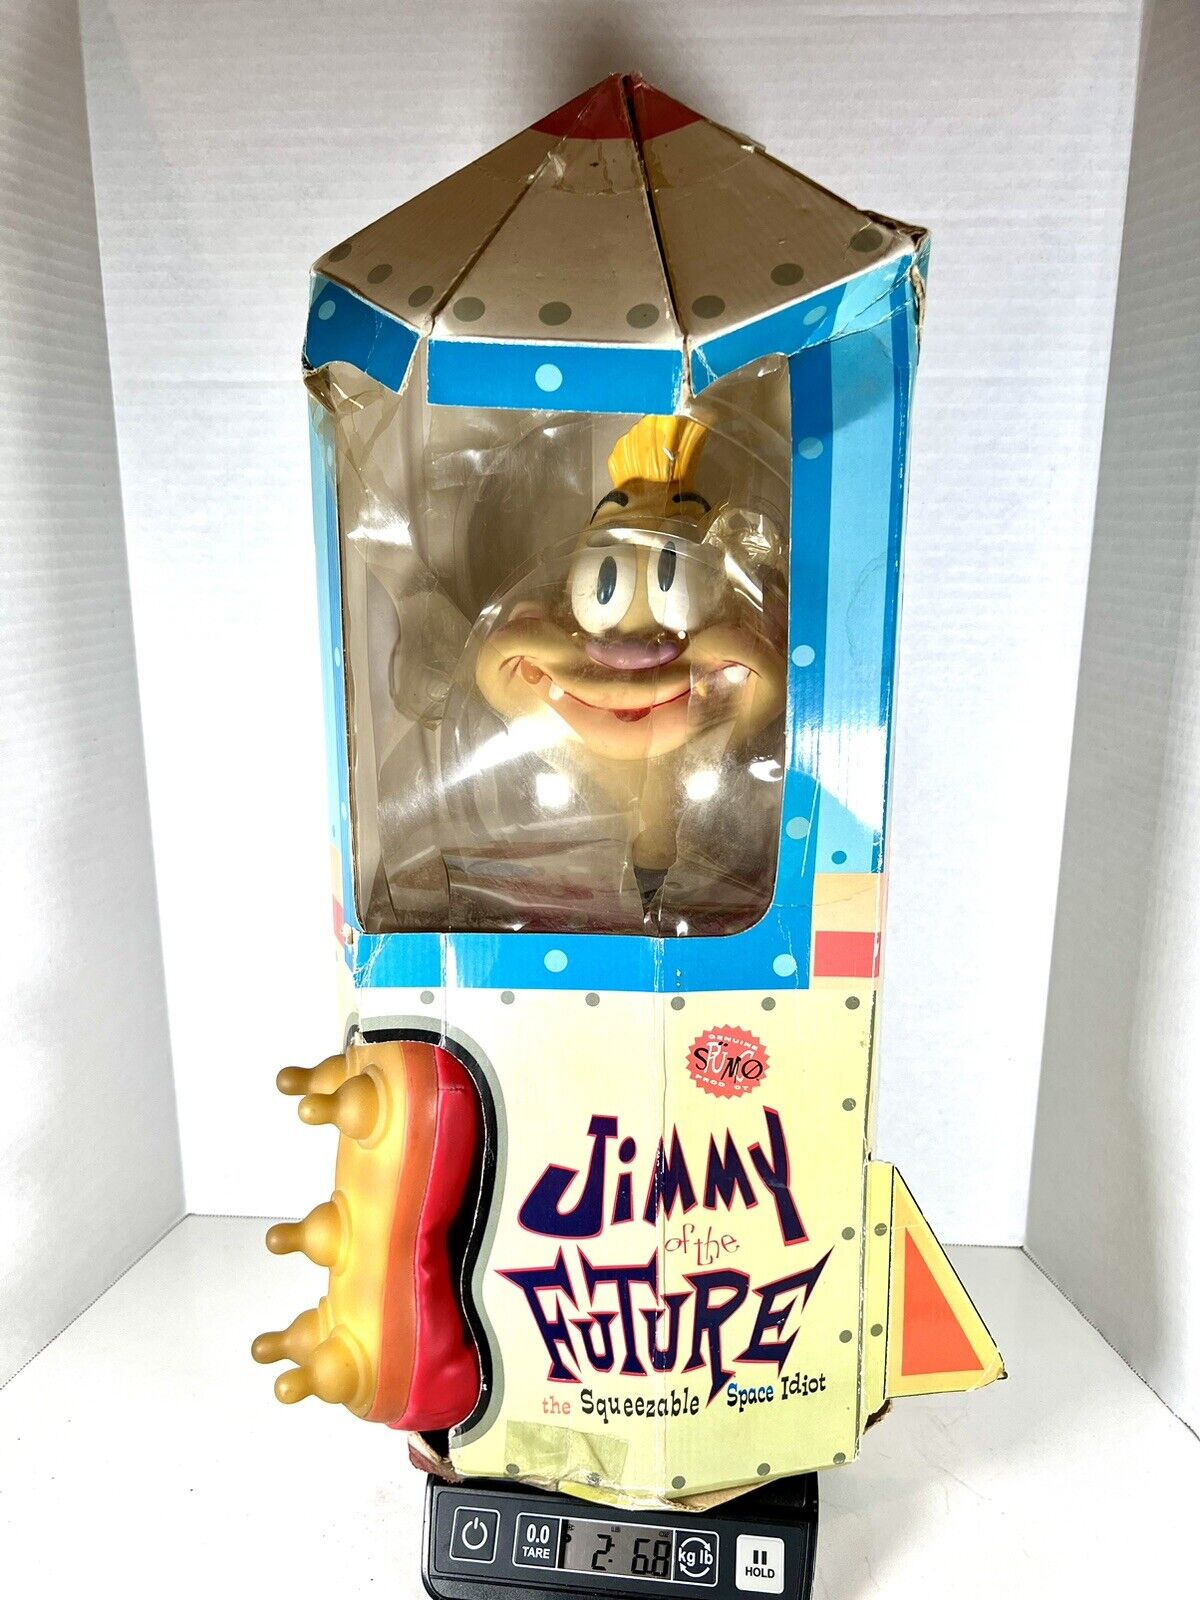 Jimmy of The Future Squeezable Space Idiot Rocket Box Spumko Vintage 1997